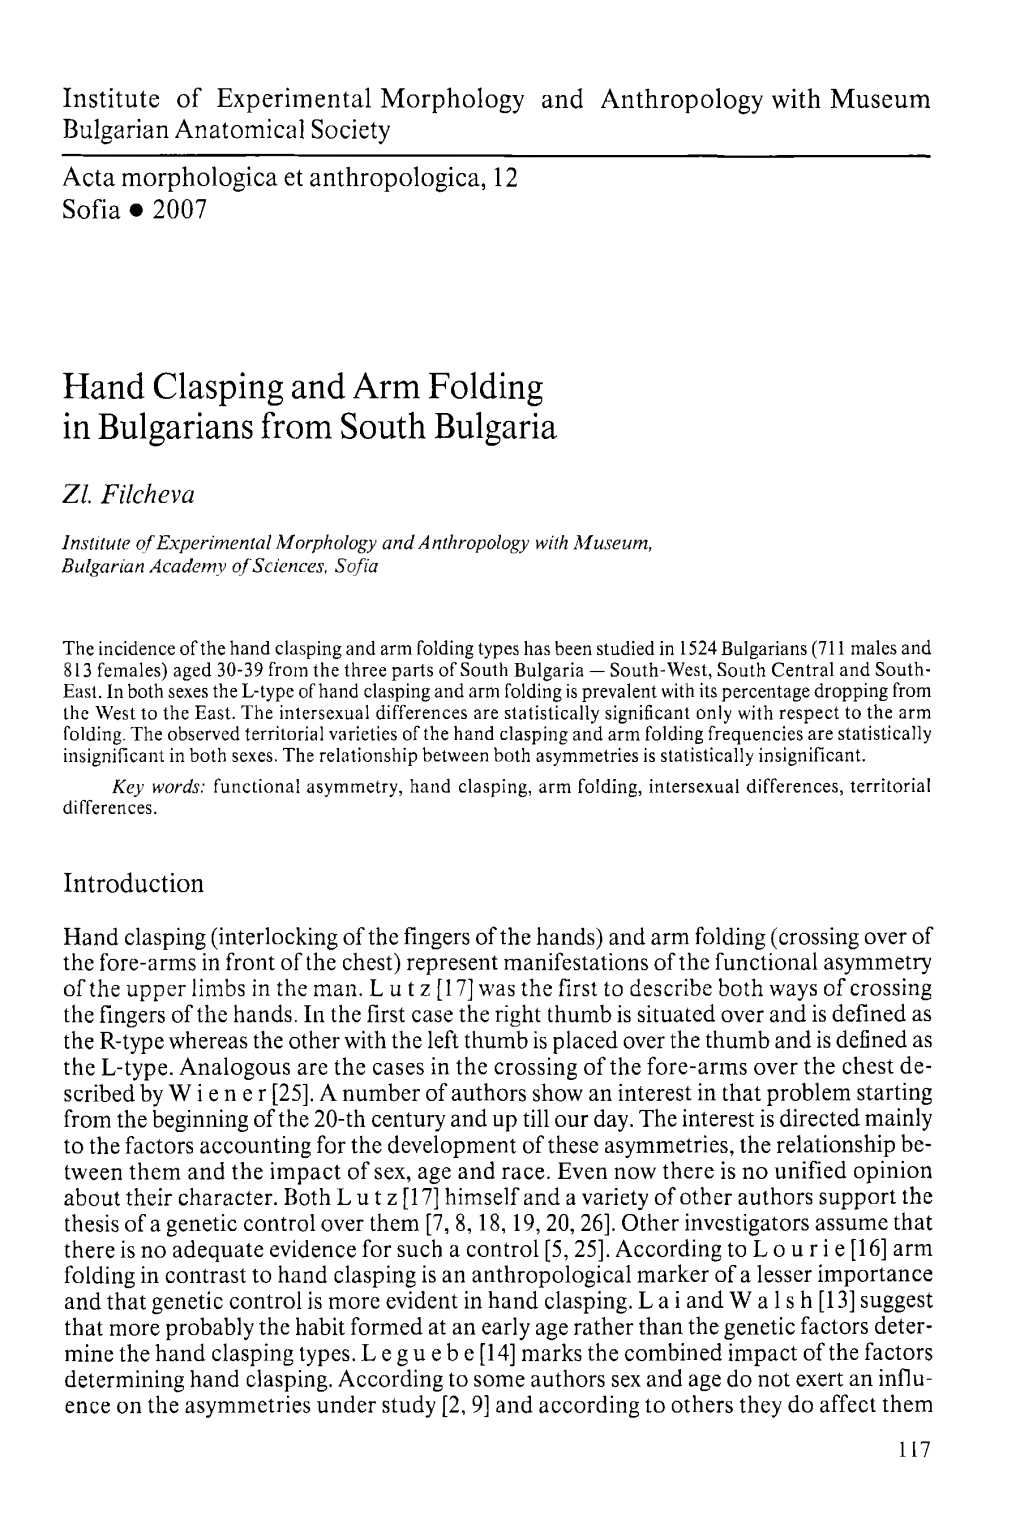 Hand Clasping and Arm Folding in Bulgarians from South Bulgaria